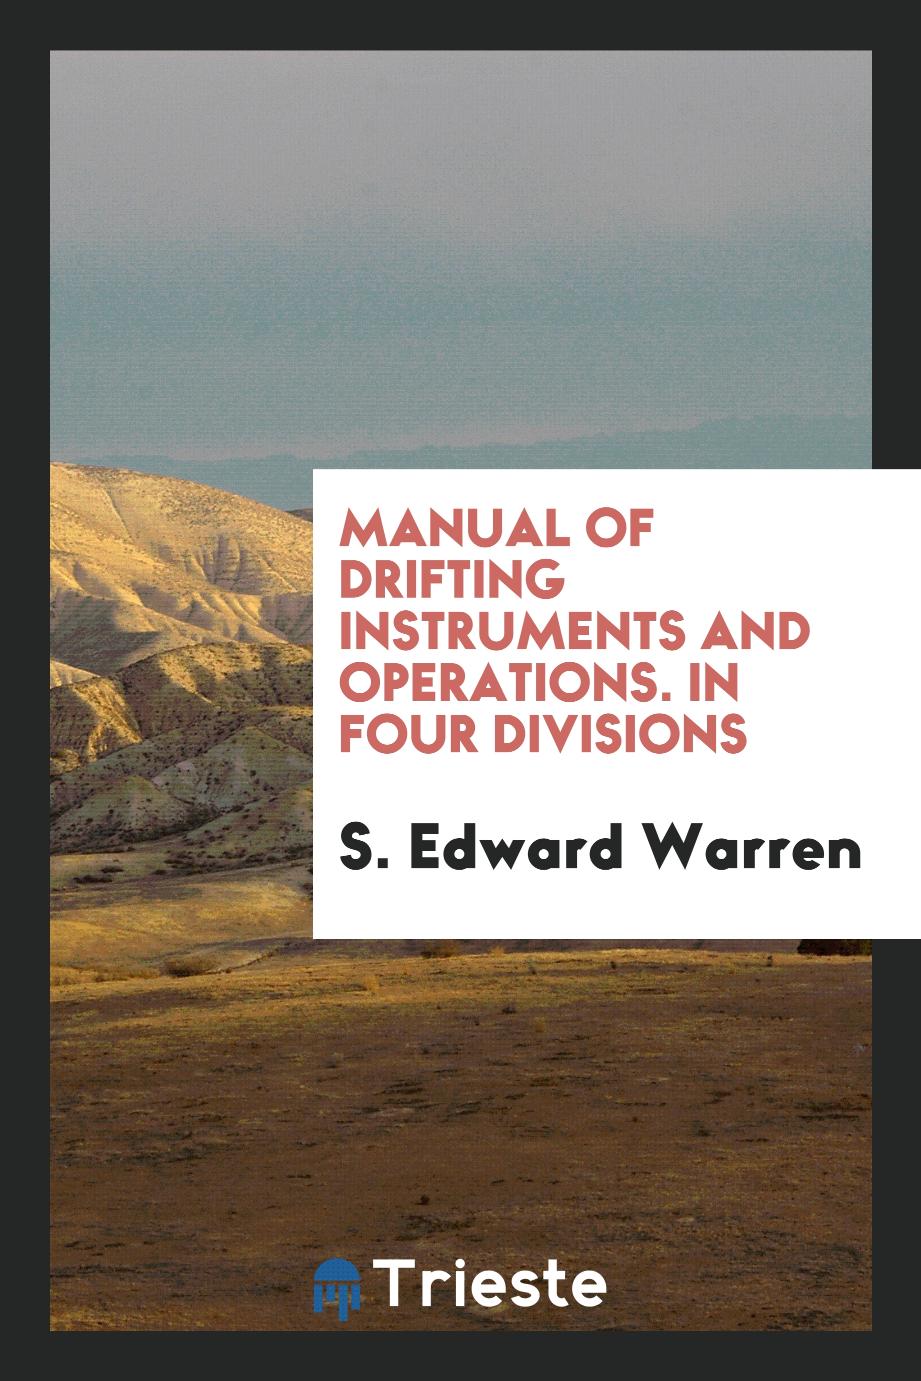 Manual of Drifting Instruments and Operations. In Four Divisions